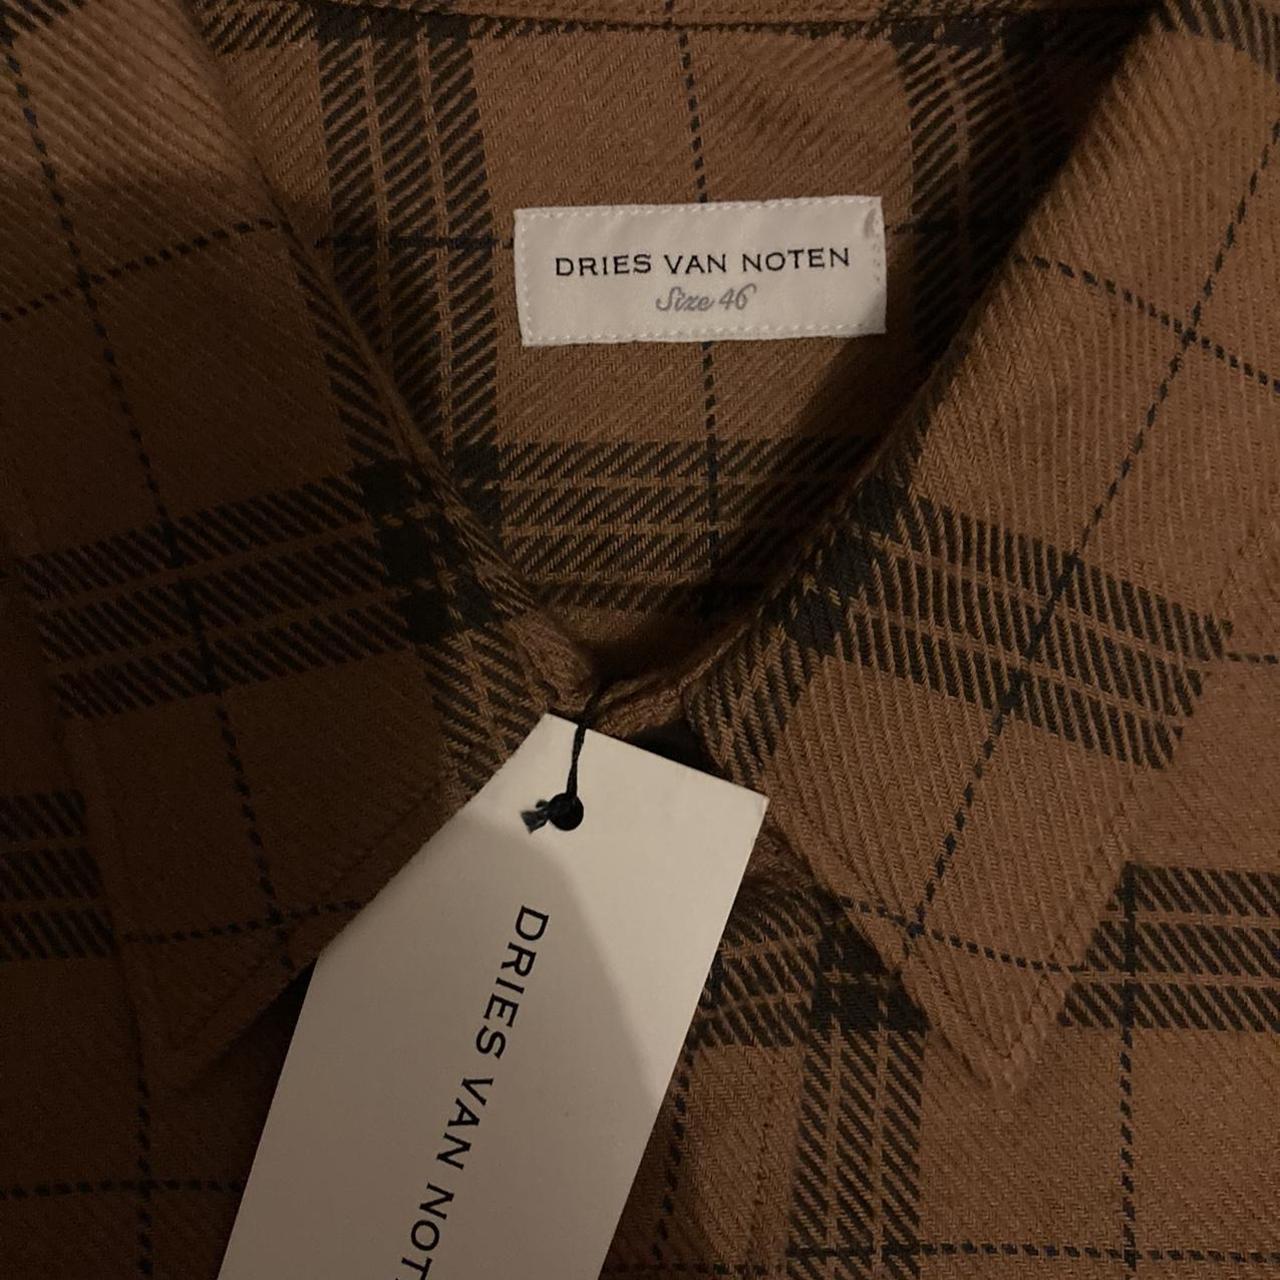 Product Image 2 - Dries Van Noten Flannel Shirt

Listed